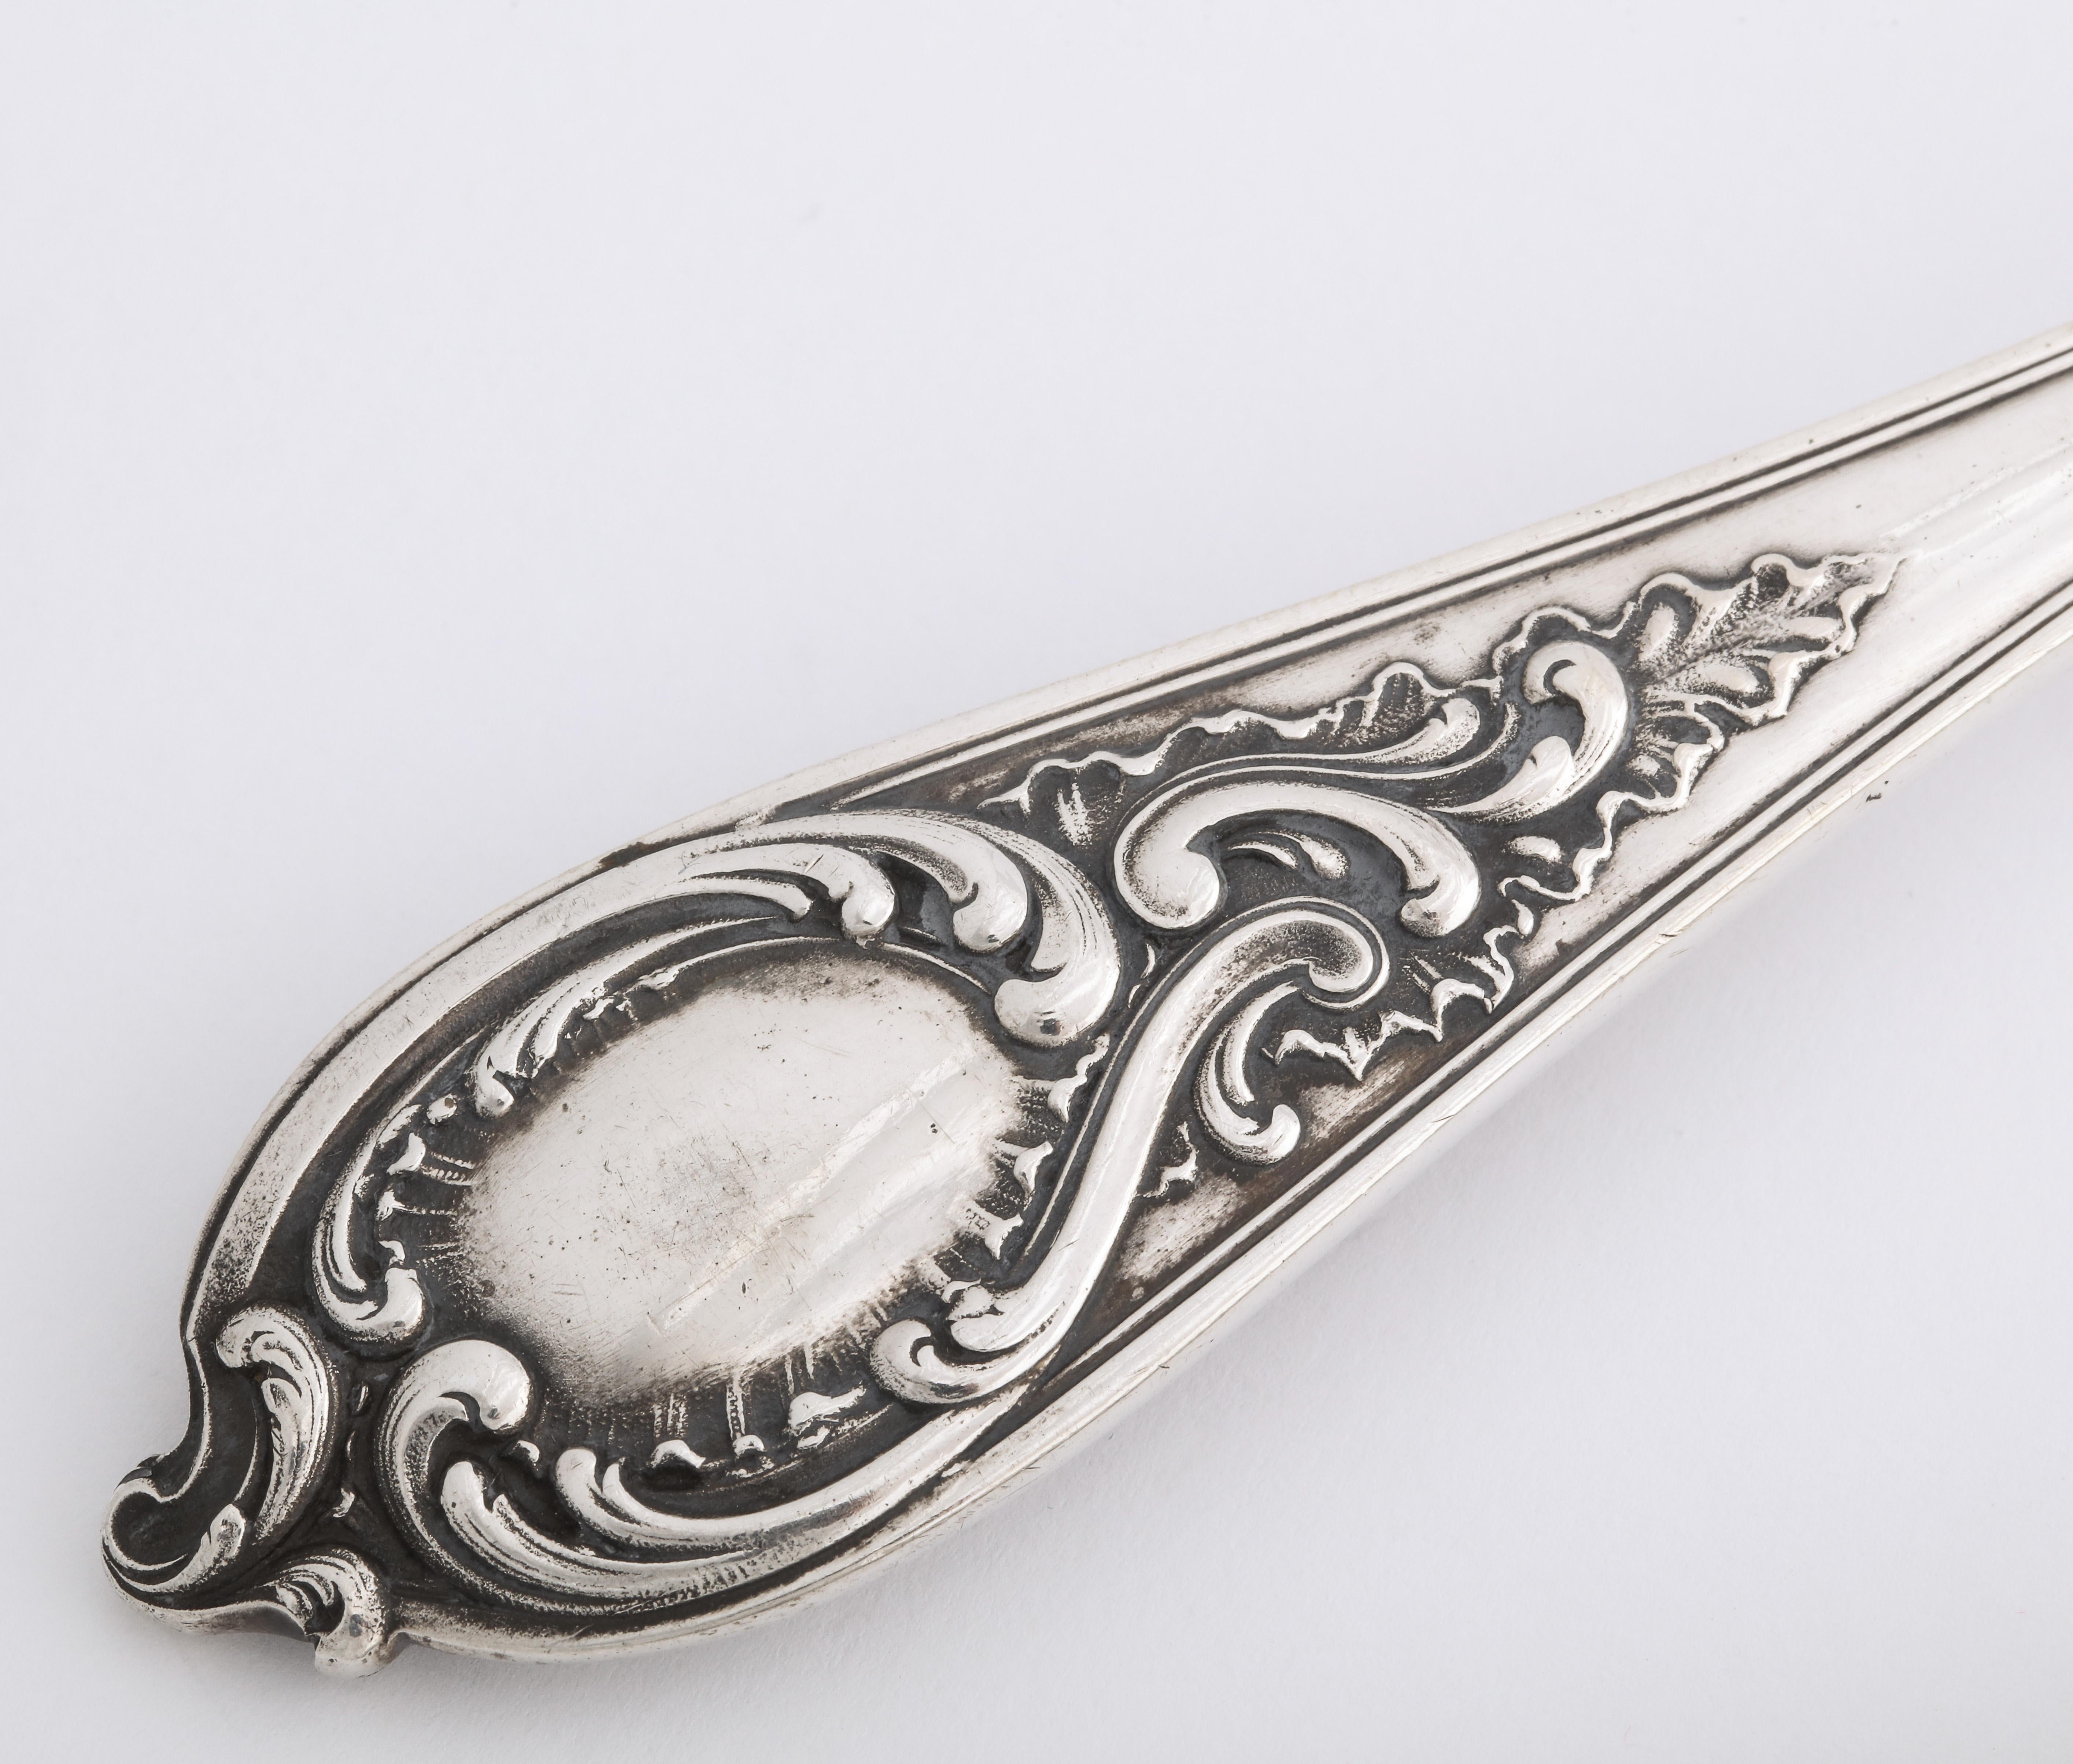 Russian Imperial-Era Fabergé Silver Dinner Knife and Fork, Moscow, Circa 1900 For Sale 3